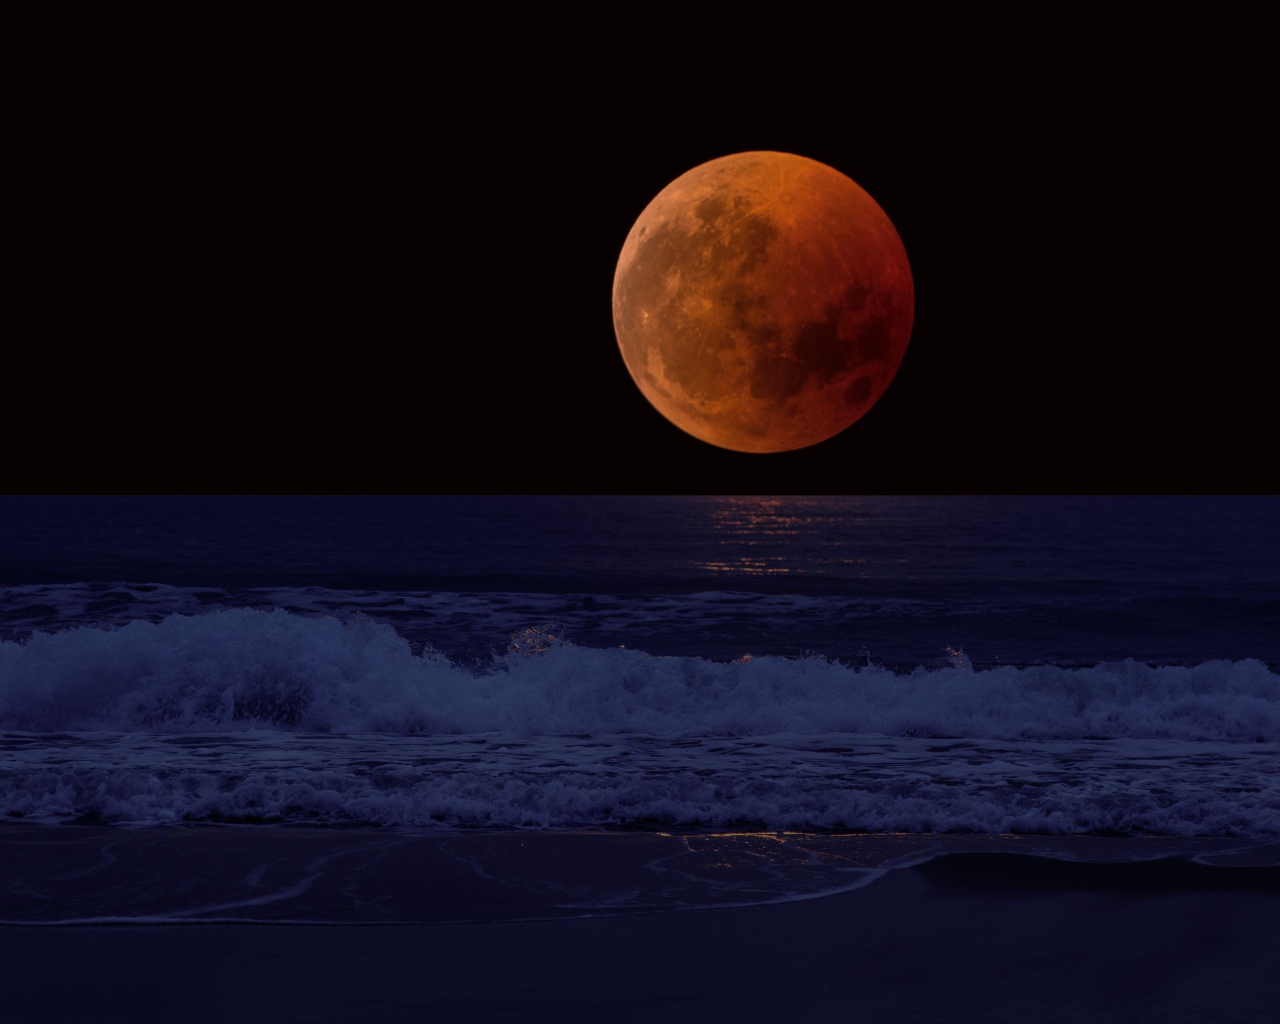 Big red moon in the dark sky over the sea